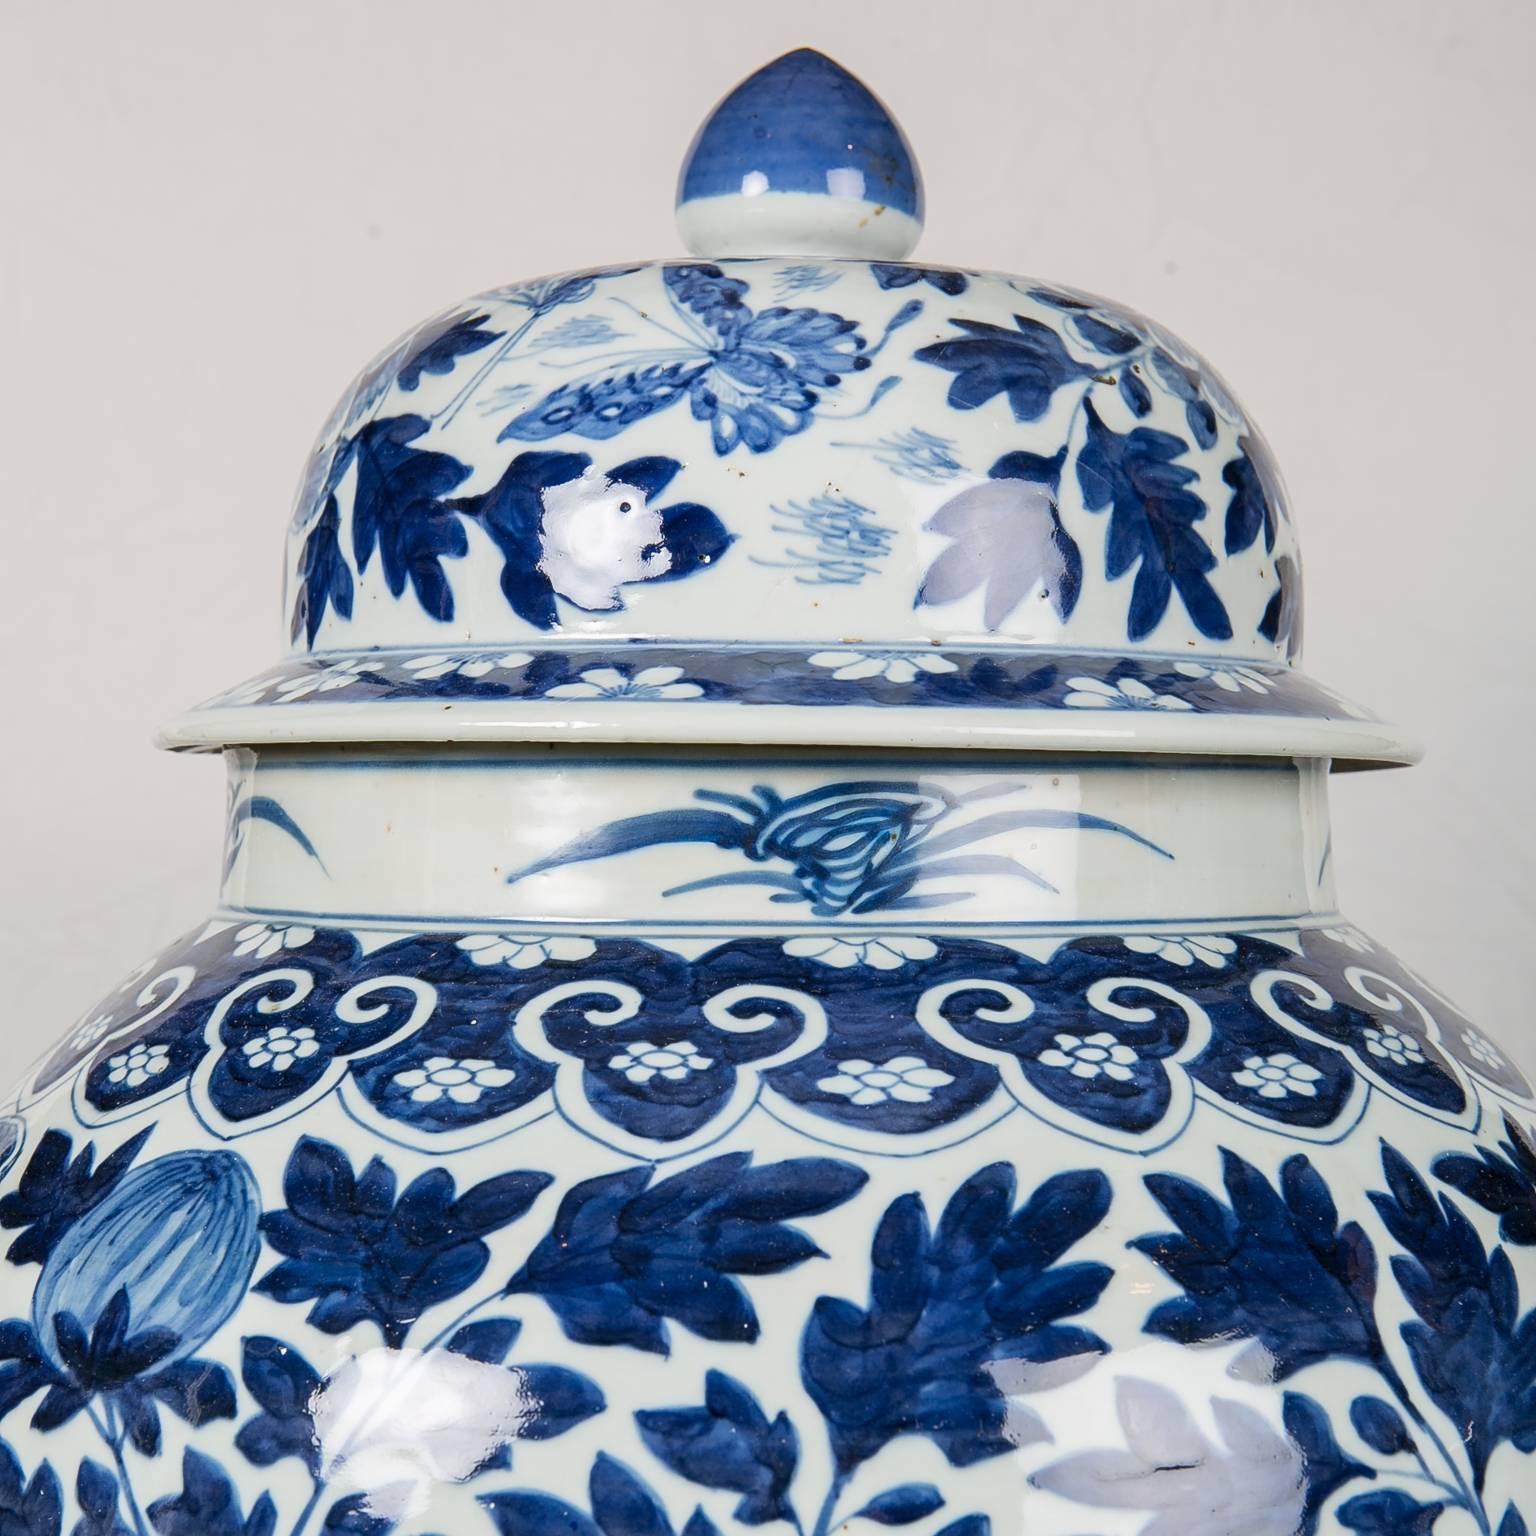 Hand-Painted Blue and White Chinese Porcelain Ginger Jars